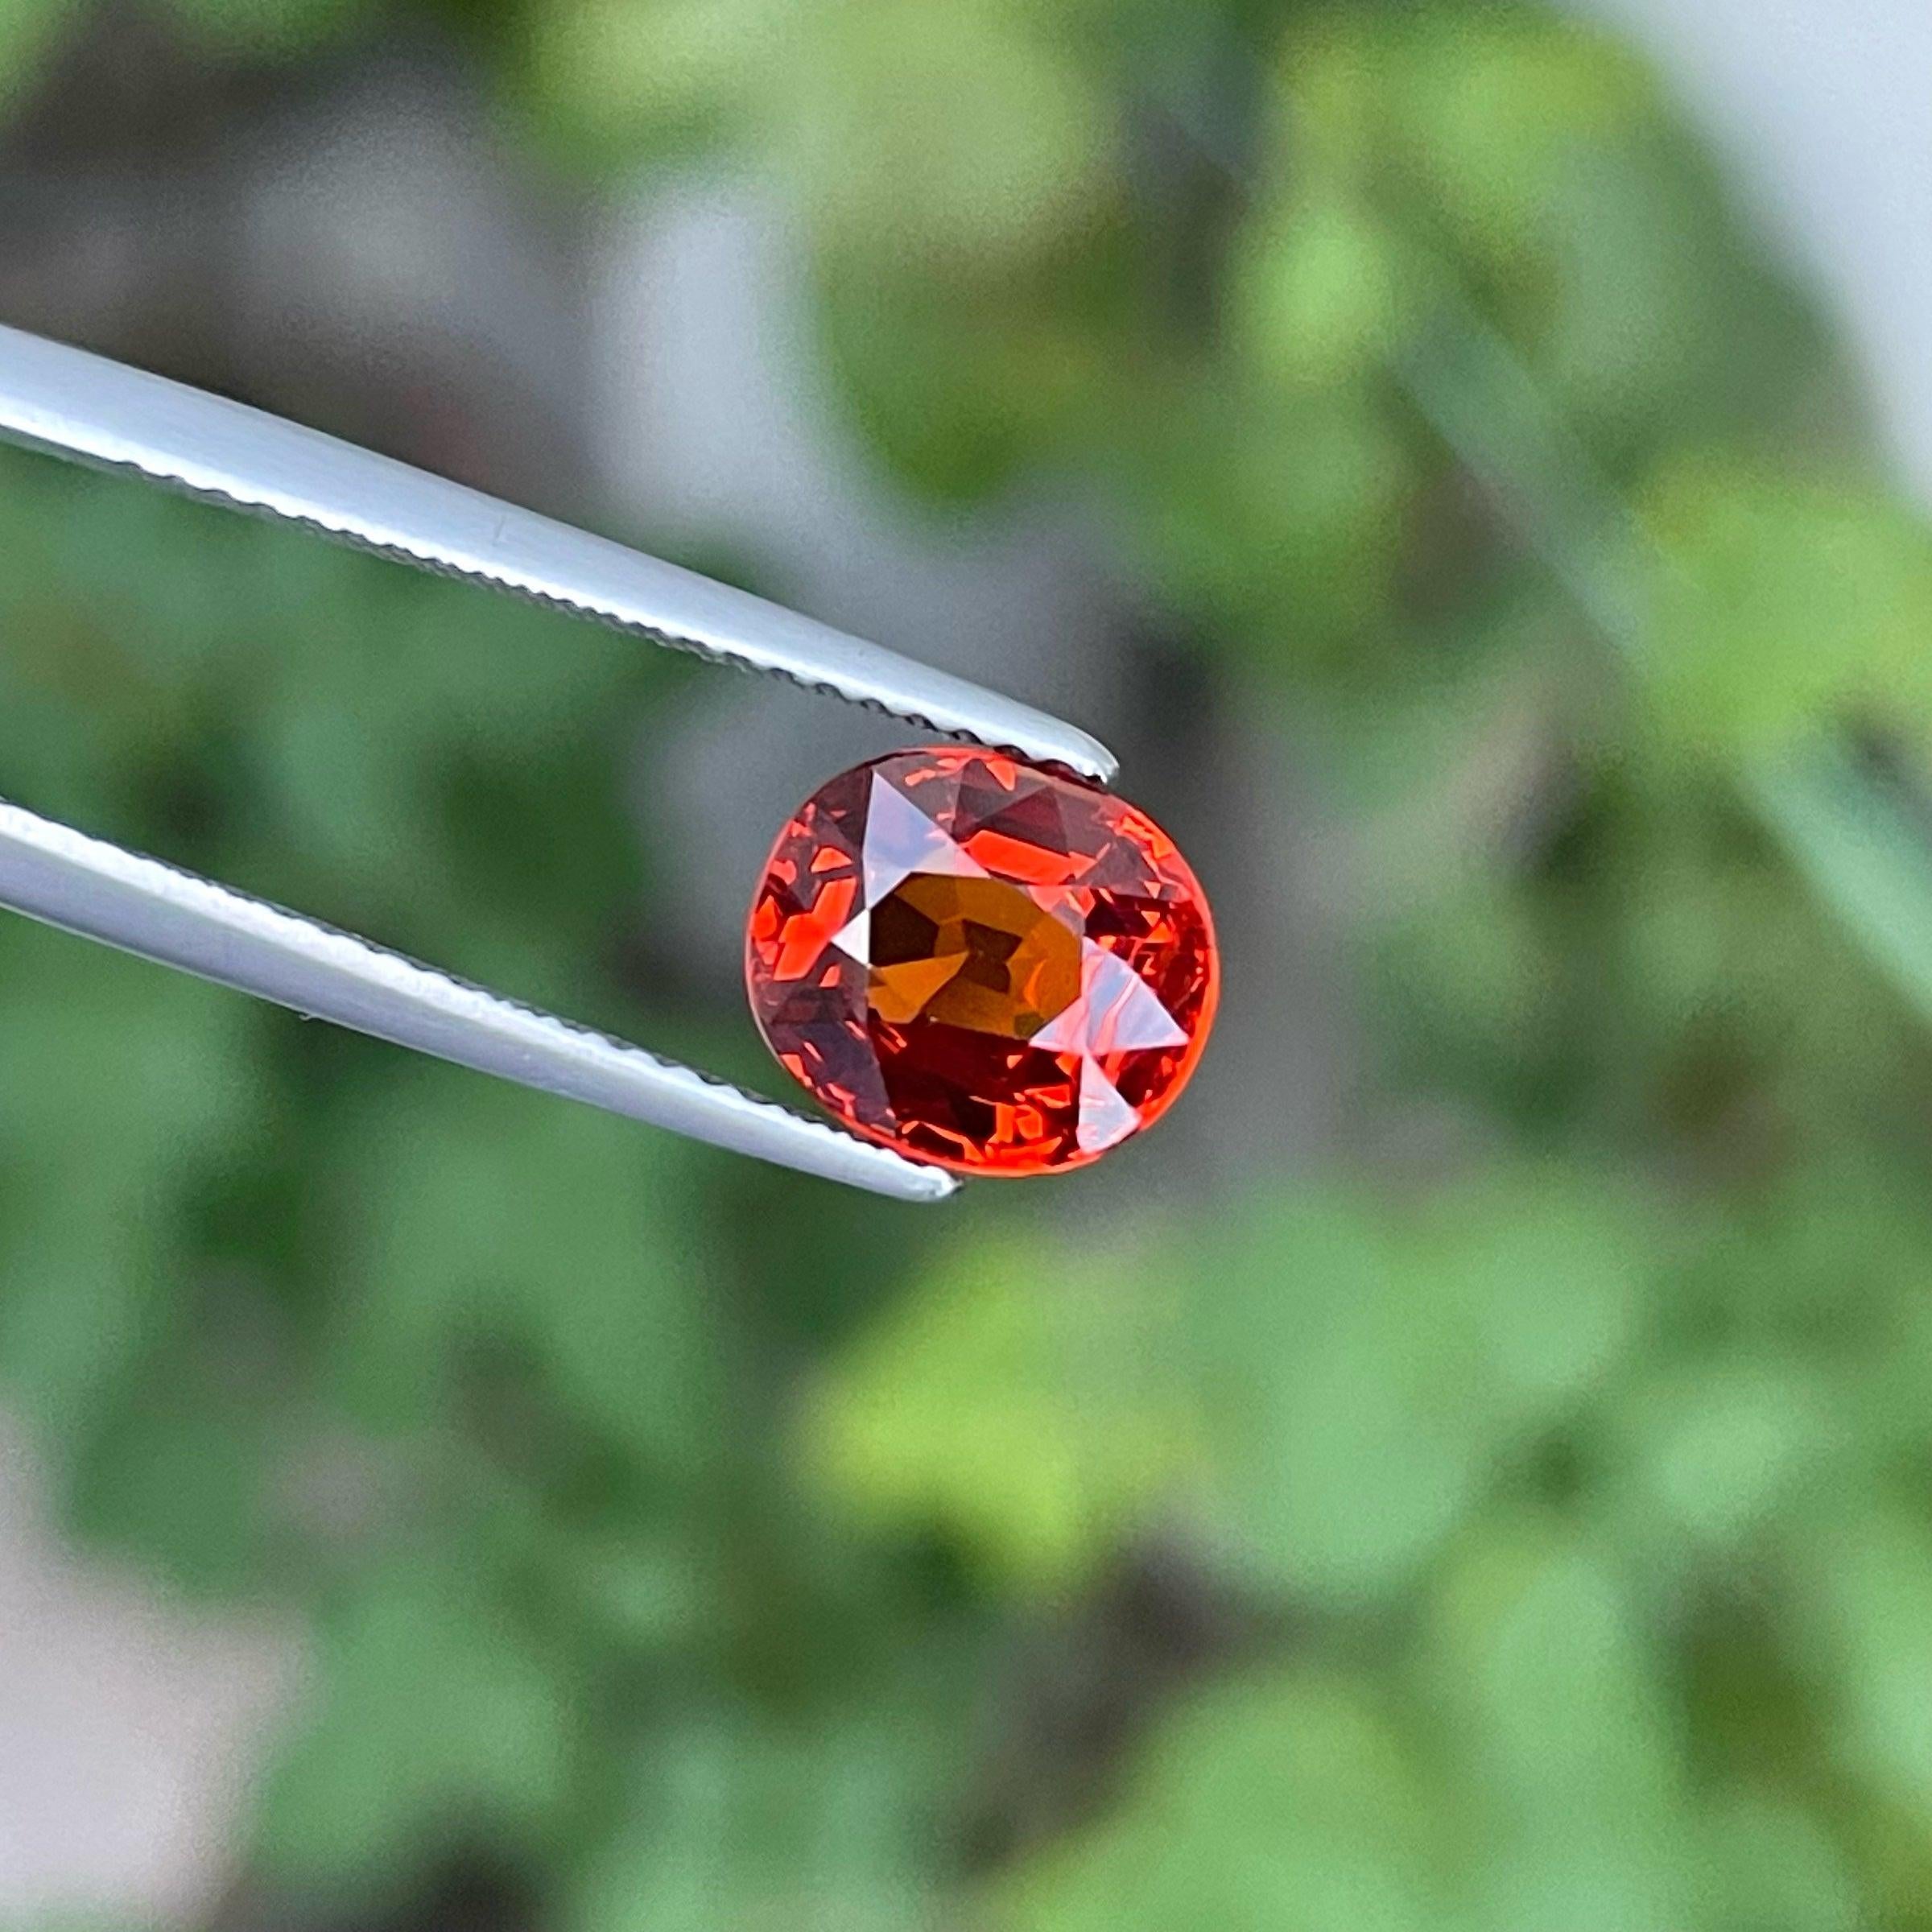 Deep Fanta Loose Garnet Gemstone, available for sale at wholesale price high natural quality 2.50 Carats VVS clarity Loose Garnet Stone From Africa.

Product Information:
GEMSTONE NAME: Deep Fanta Loose Garnet Gemstone
WEIGHT:	2.50